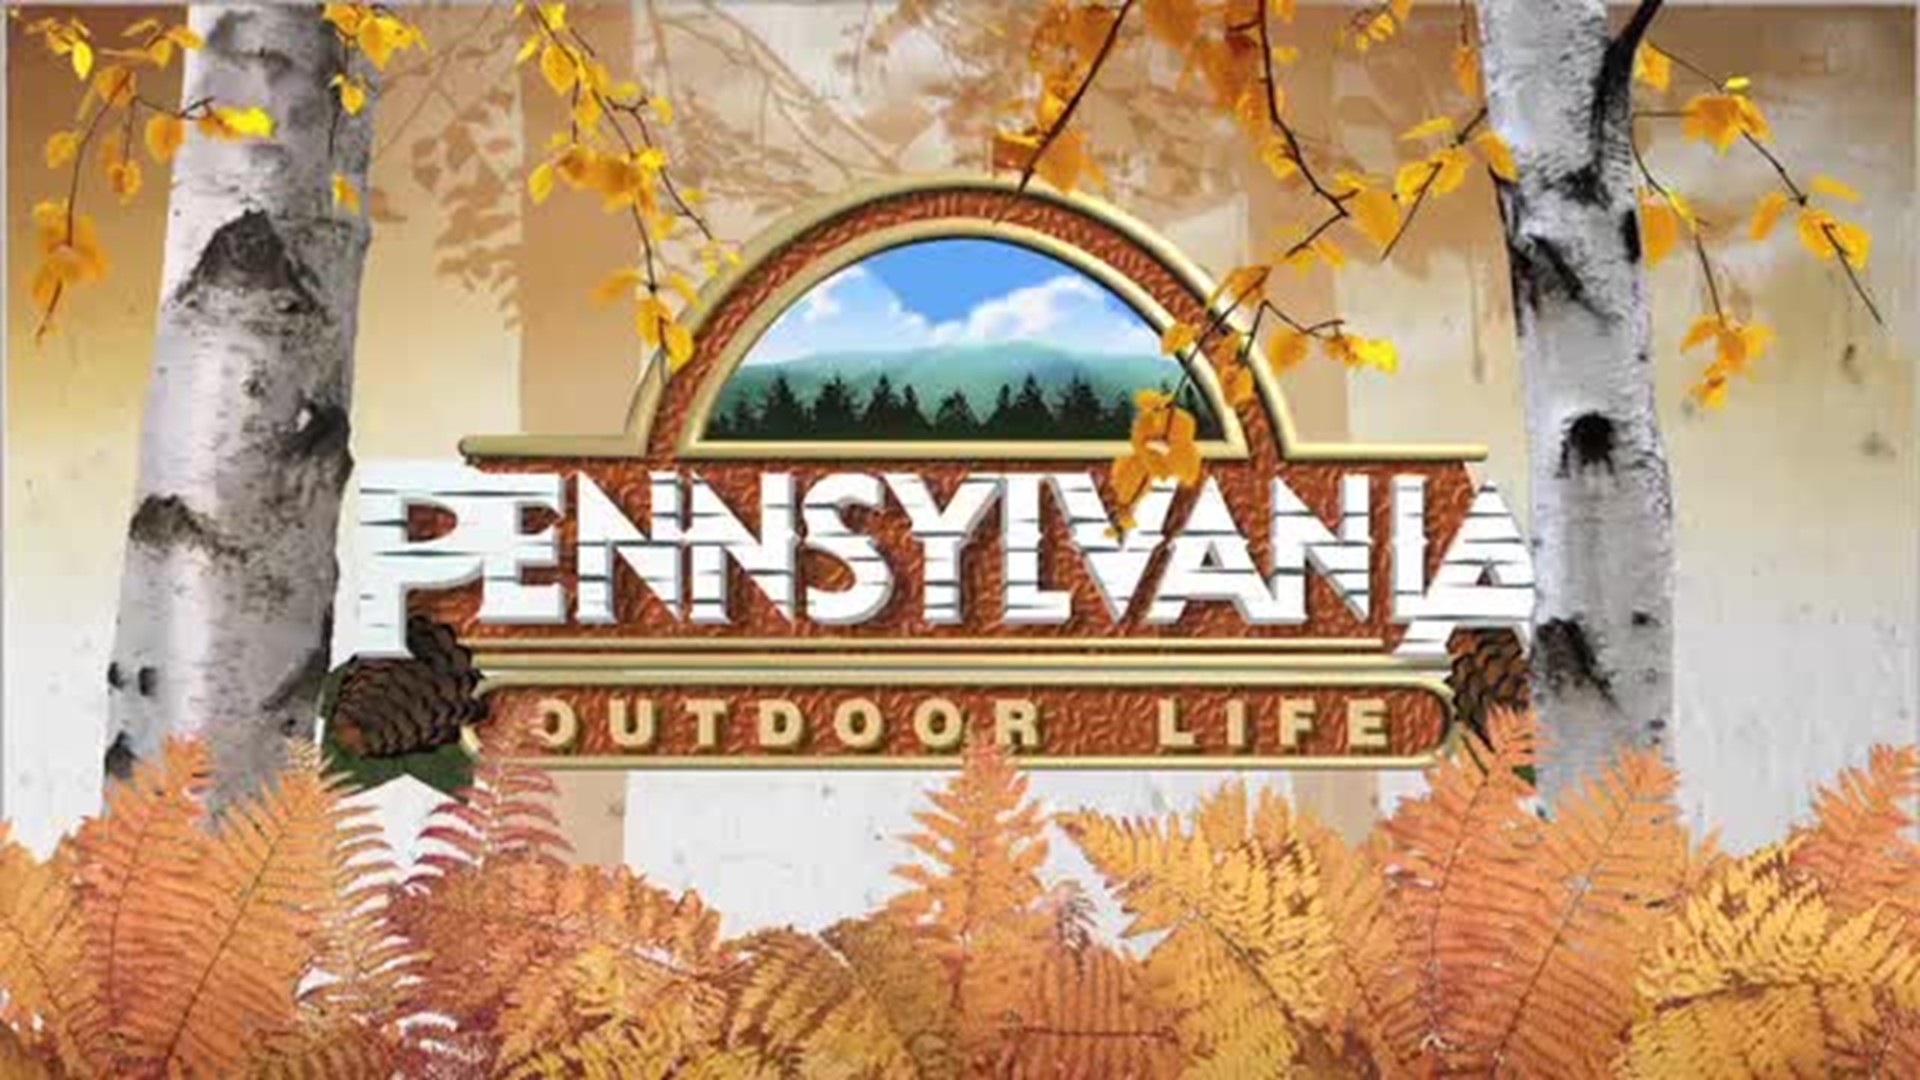 This week on Pennsylvania Outdoor Life